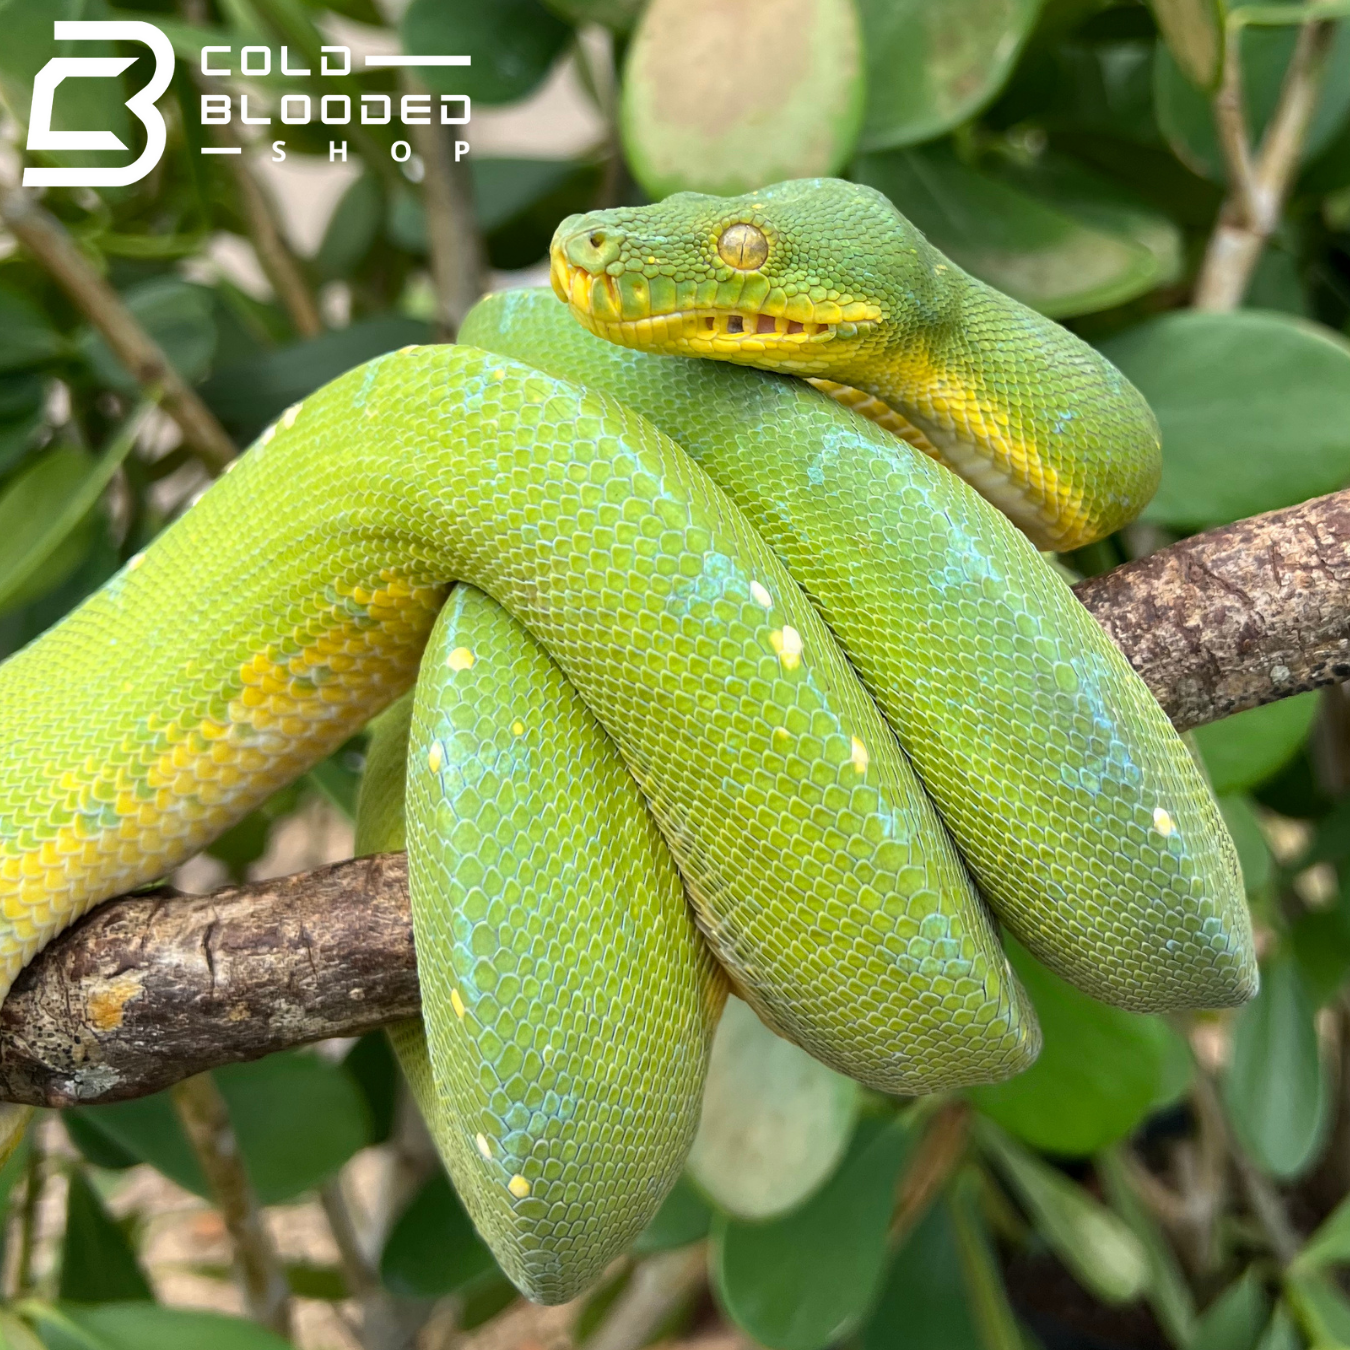 Green Tree Python - Cold Blooded Shop